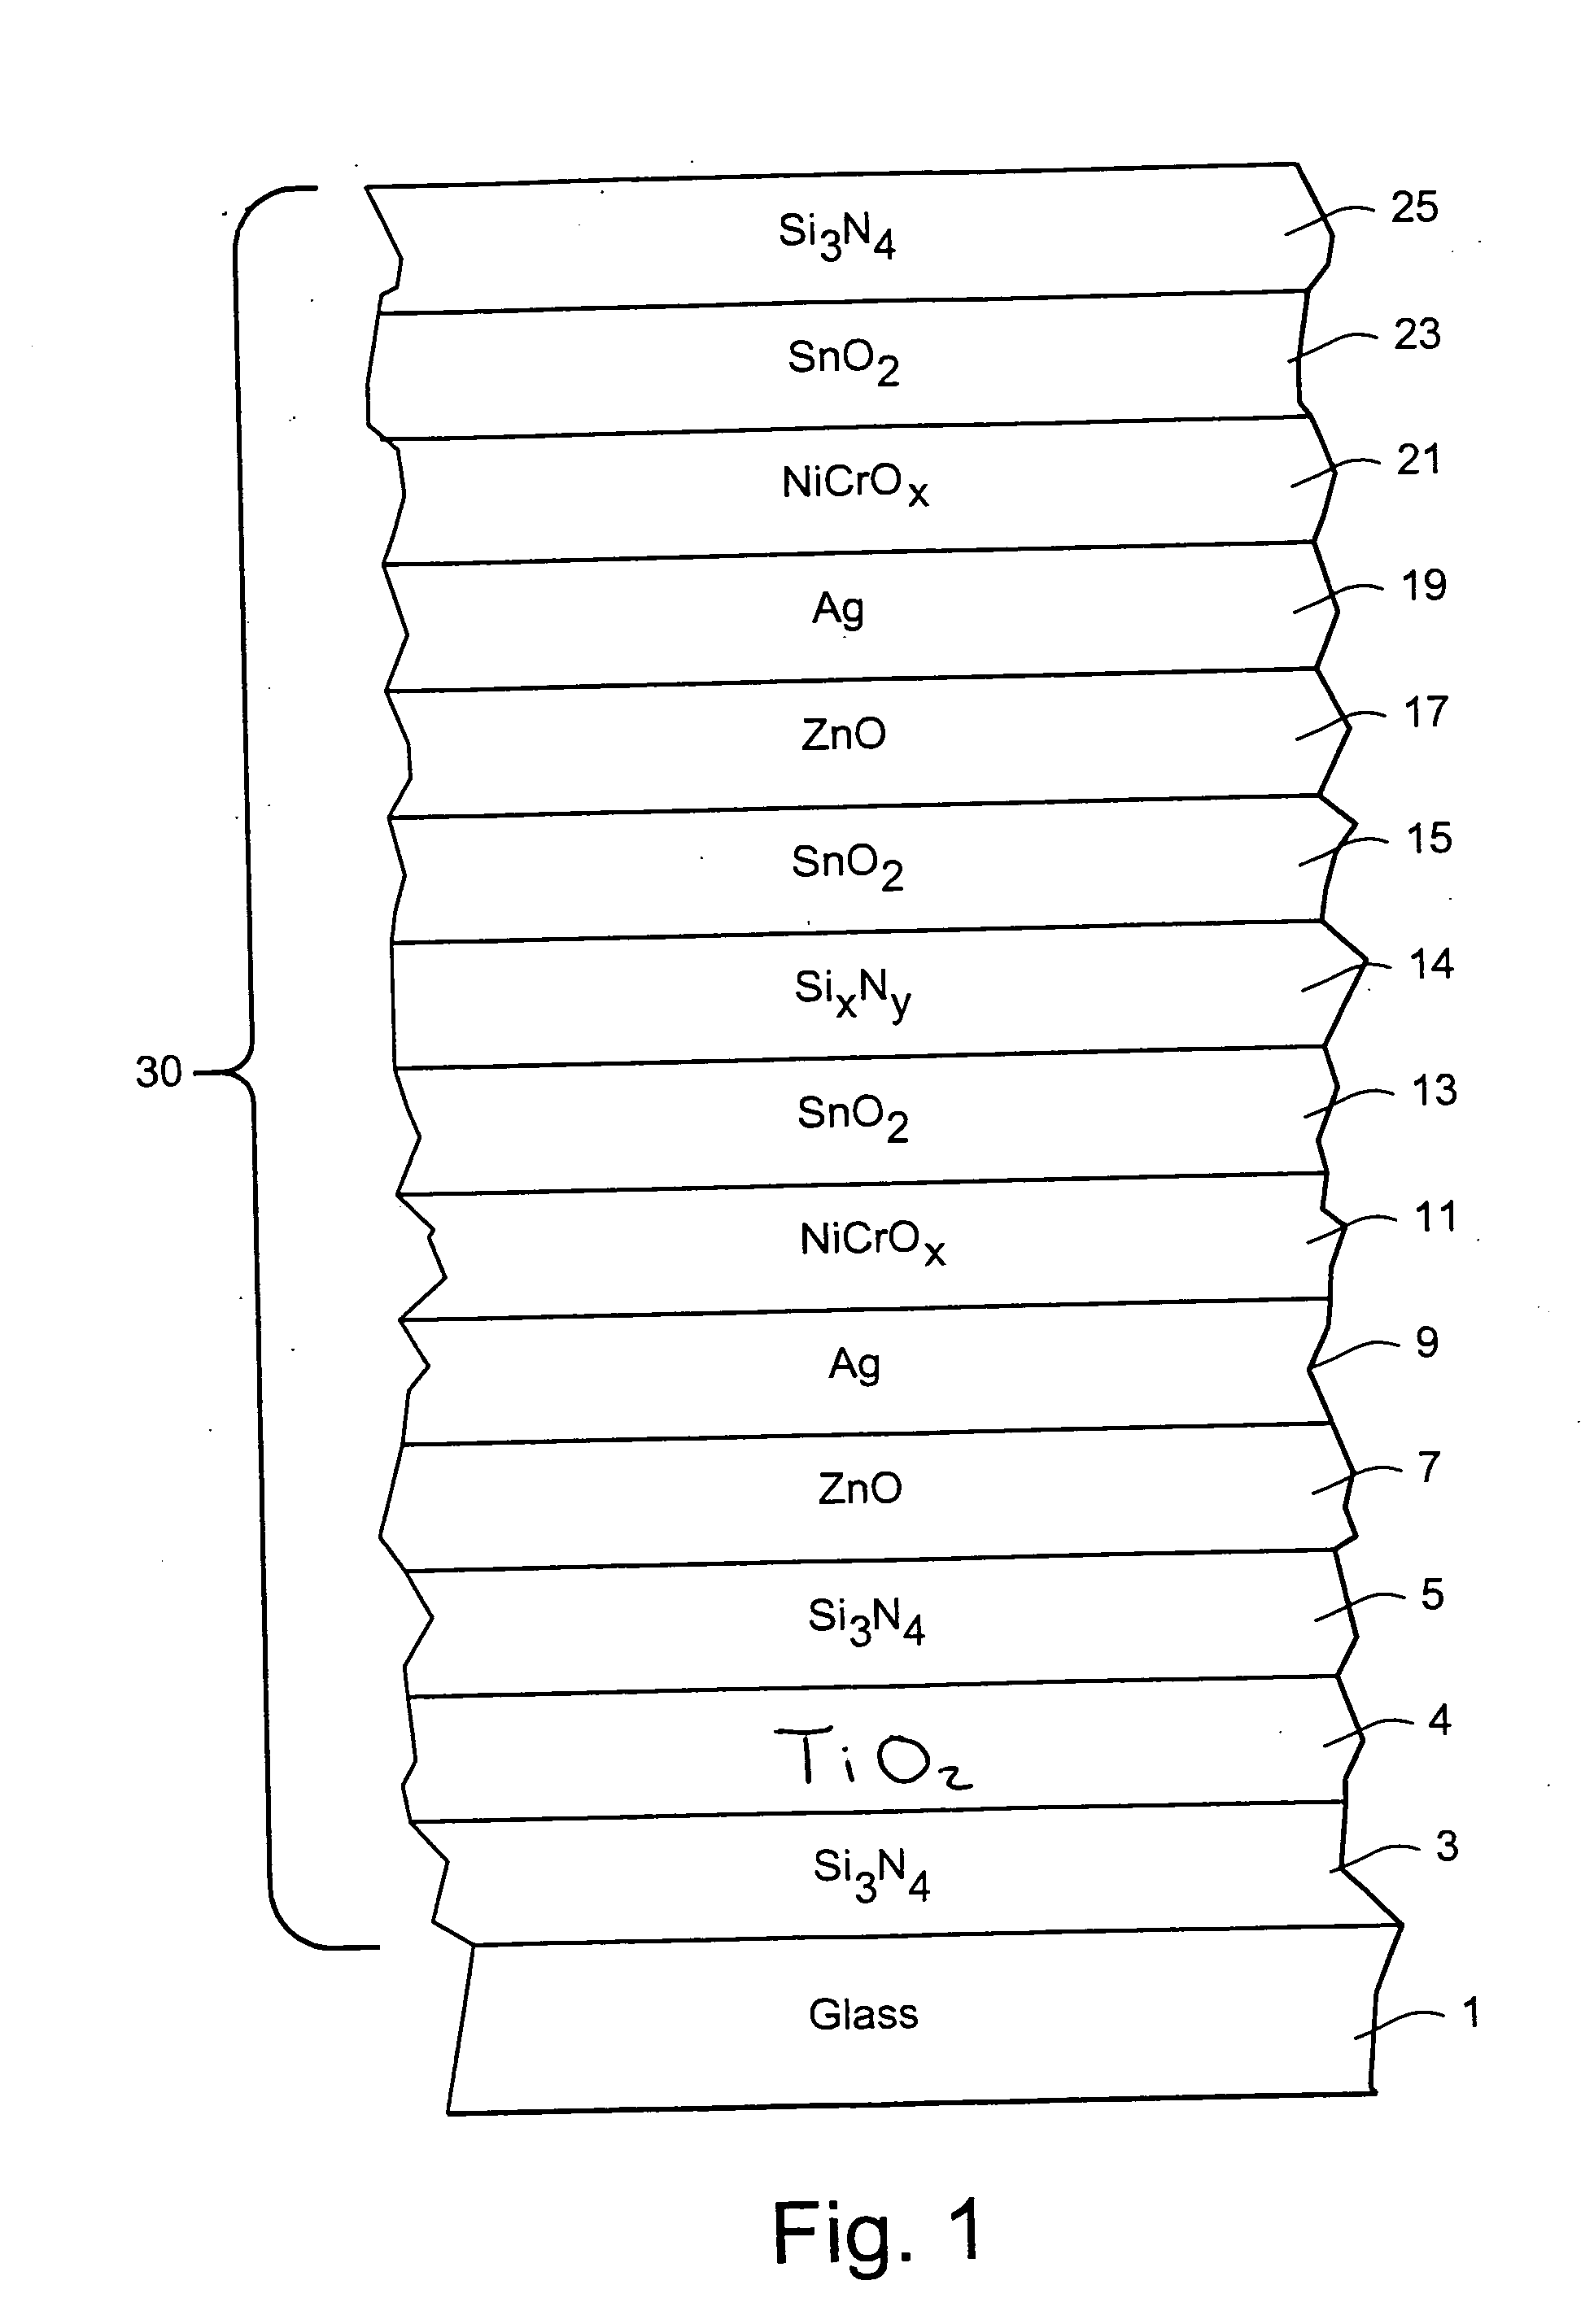 Coated article with low-E coating having titanium oxide layer and/or nicr based layer(s) to improve color values and/or transmission, and method of making same